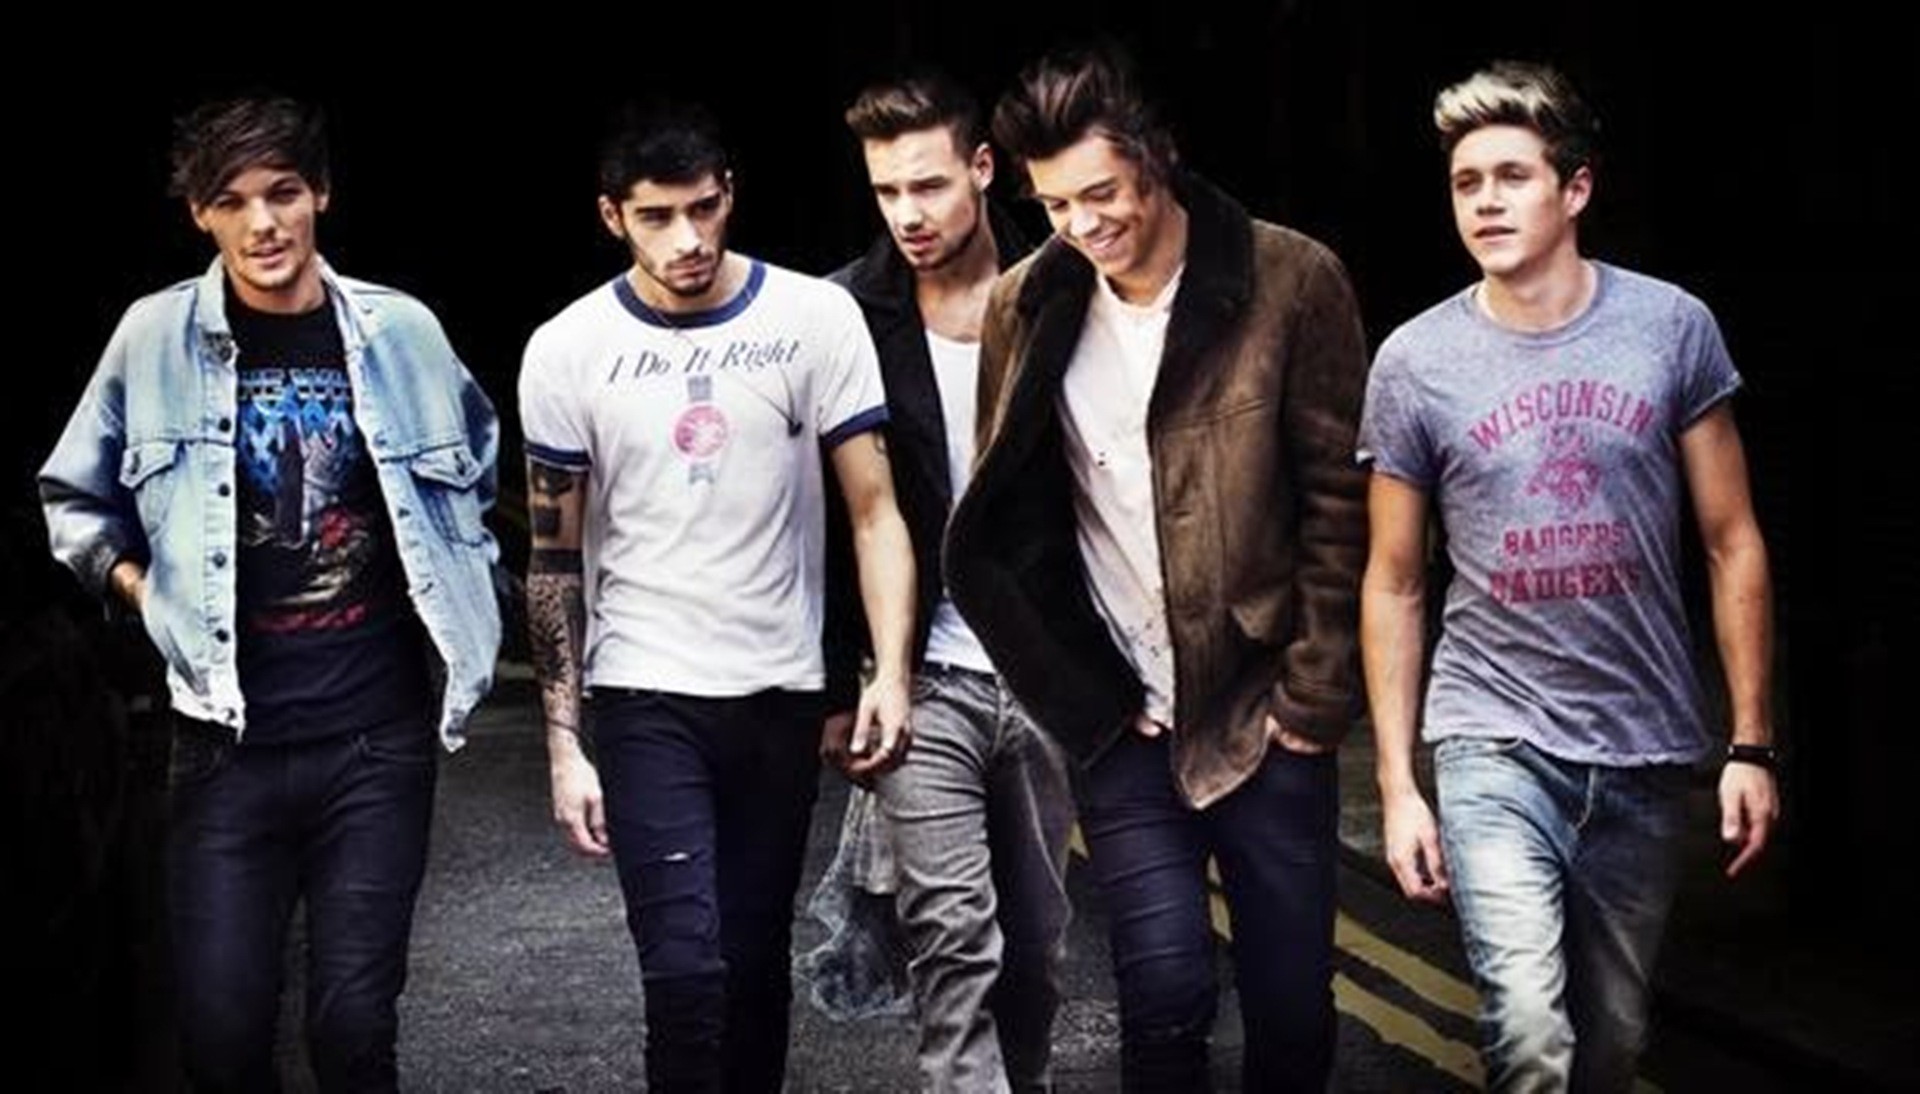 1920x1094 Midnight Memories is a song recorded by English-Irish boy band One Direction  from their third studio album of the same name.